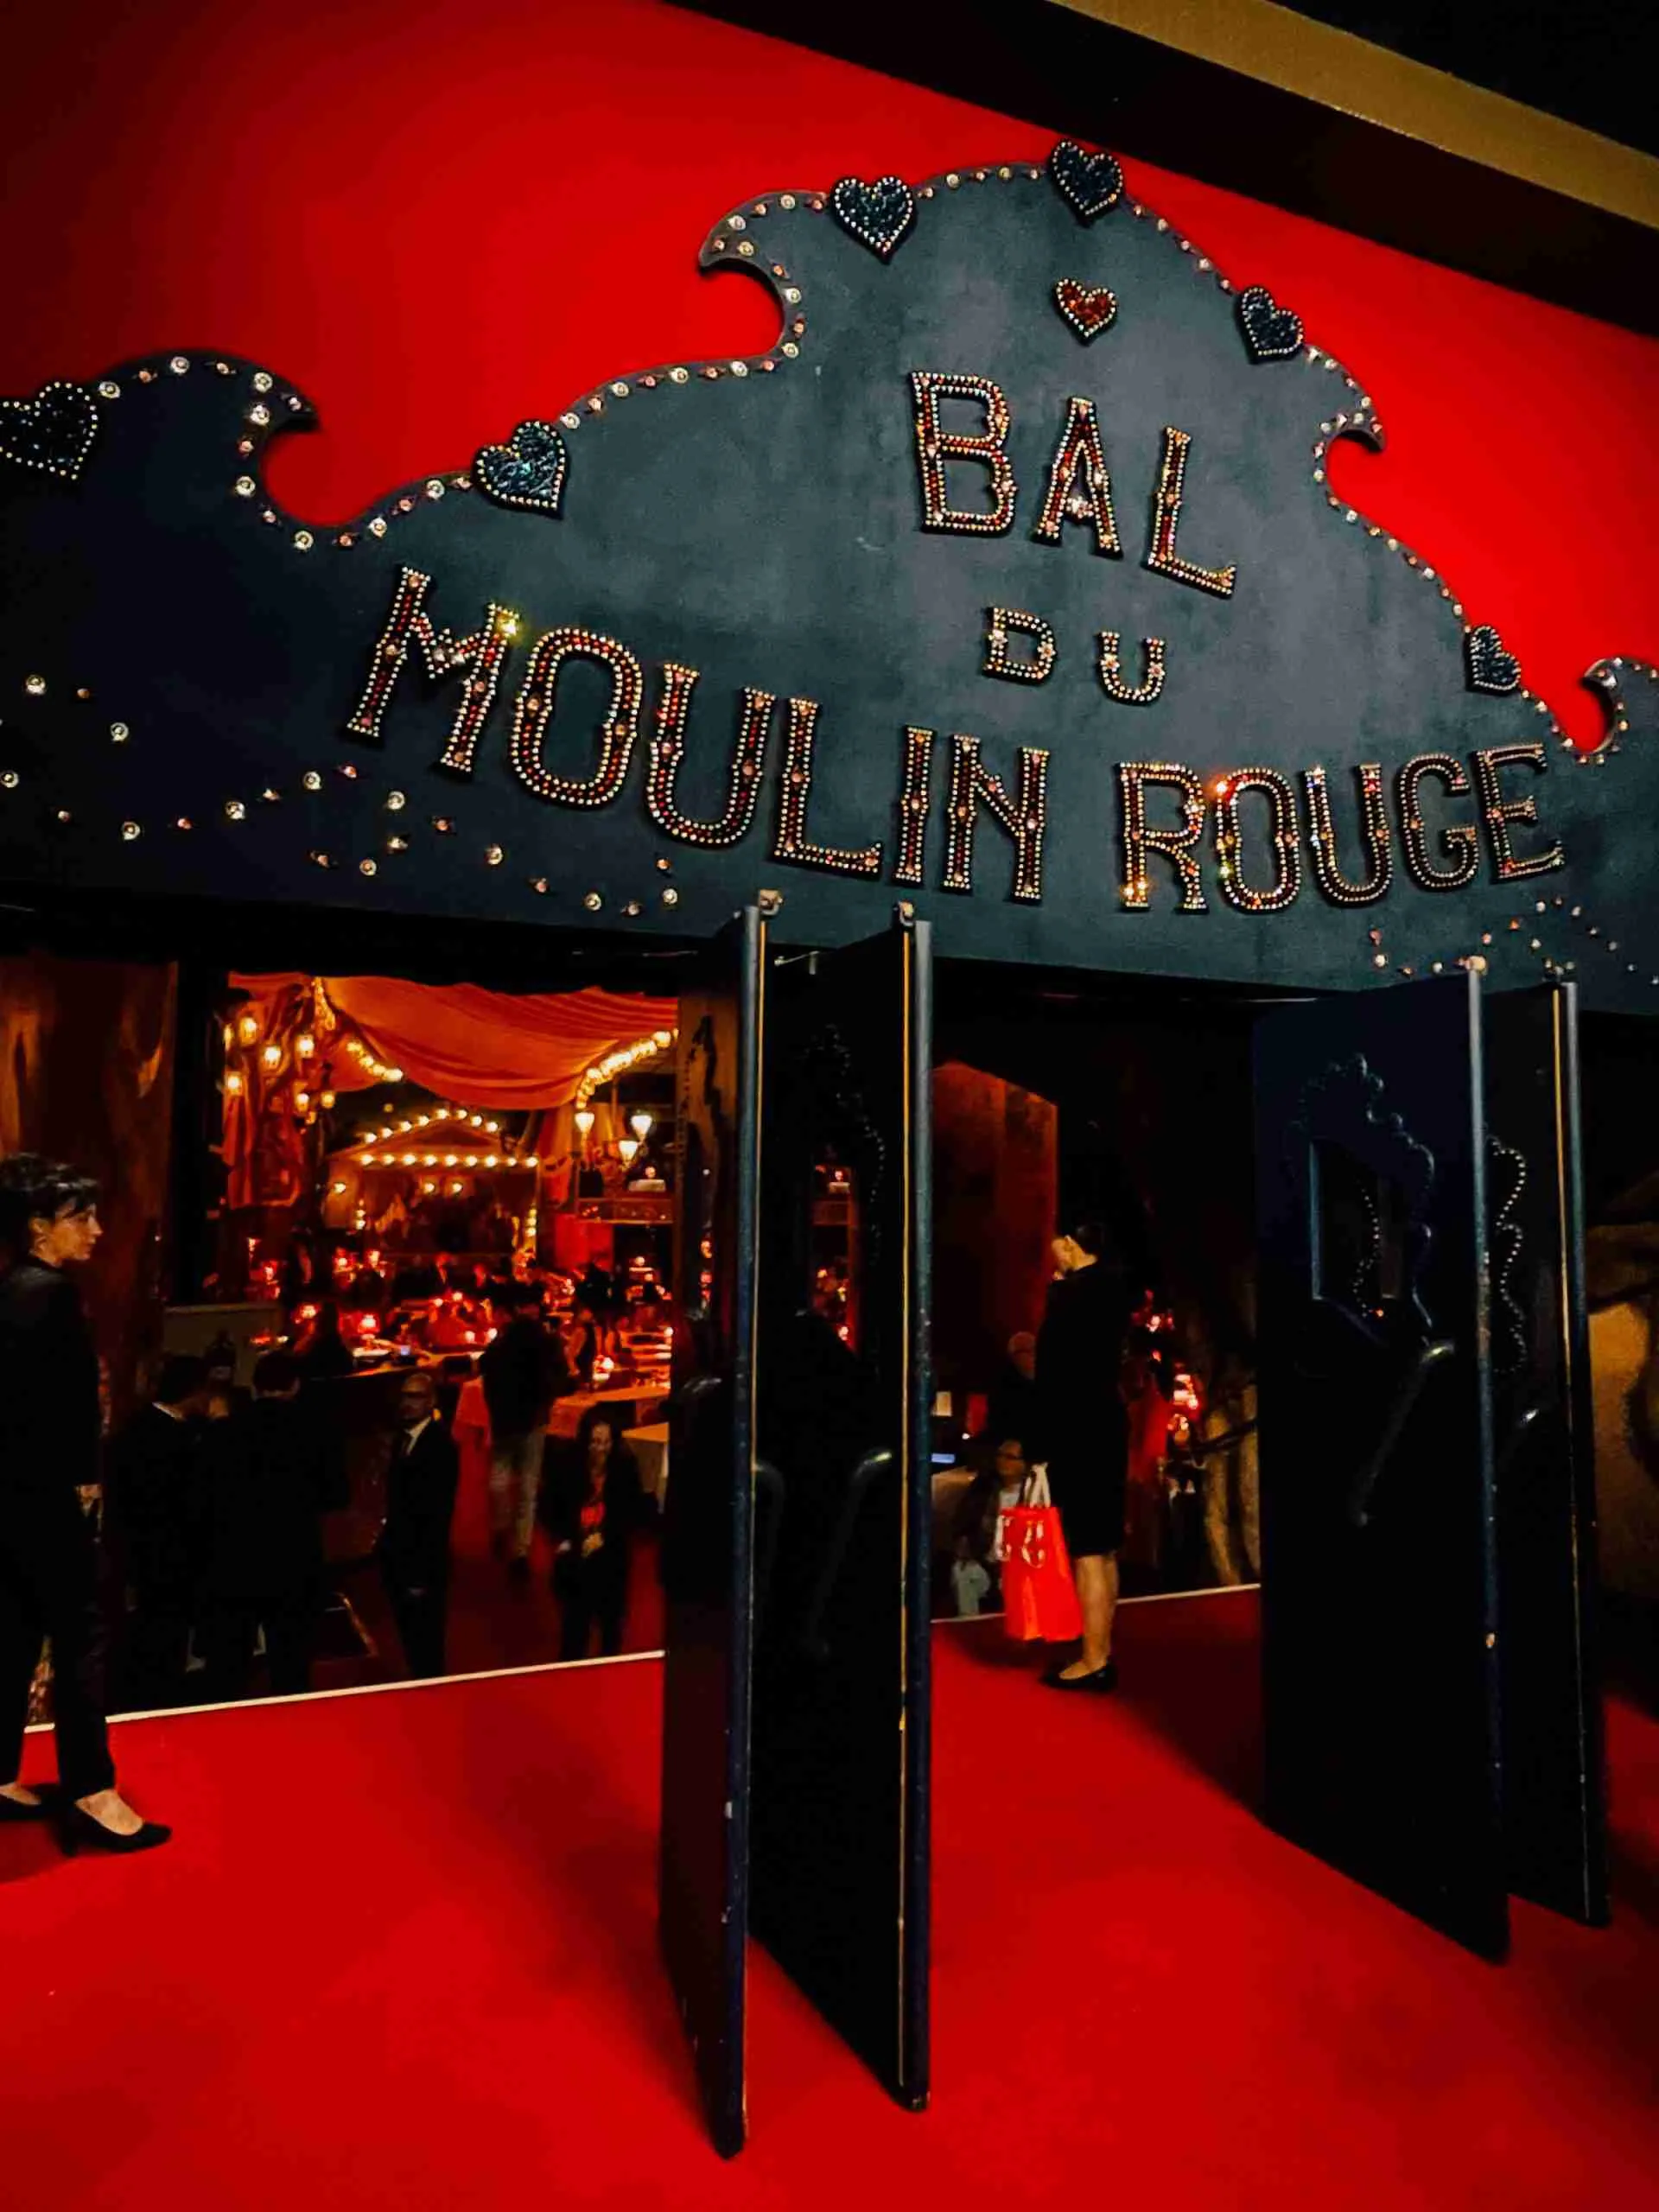 Walking into the Moulin Rouge